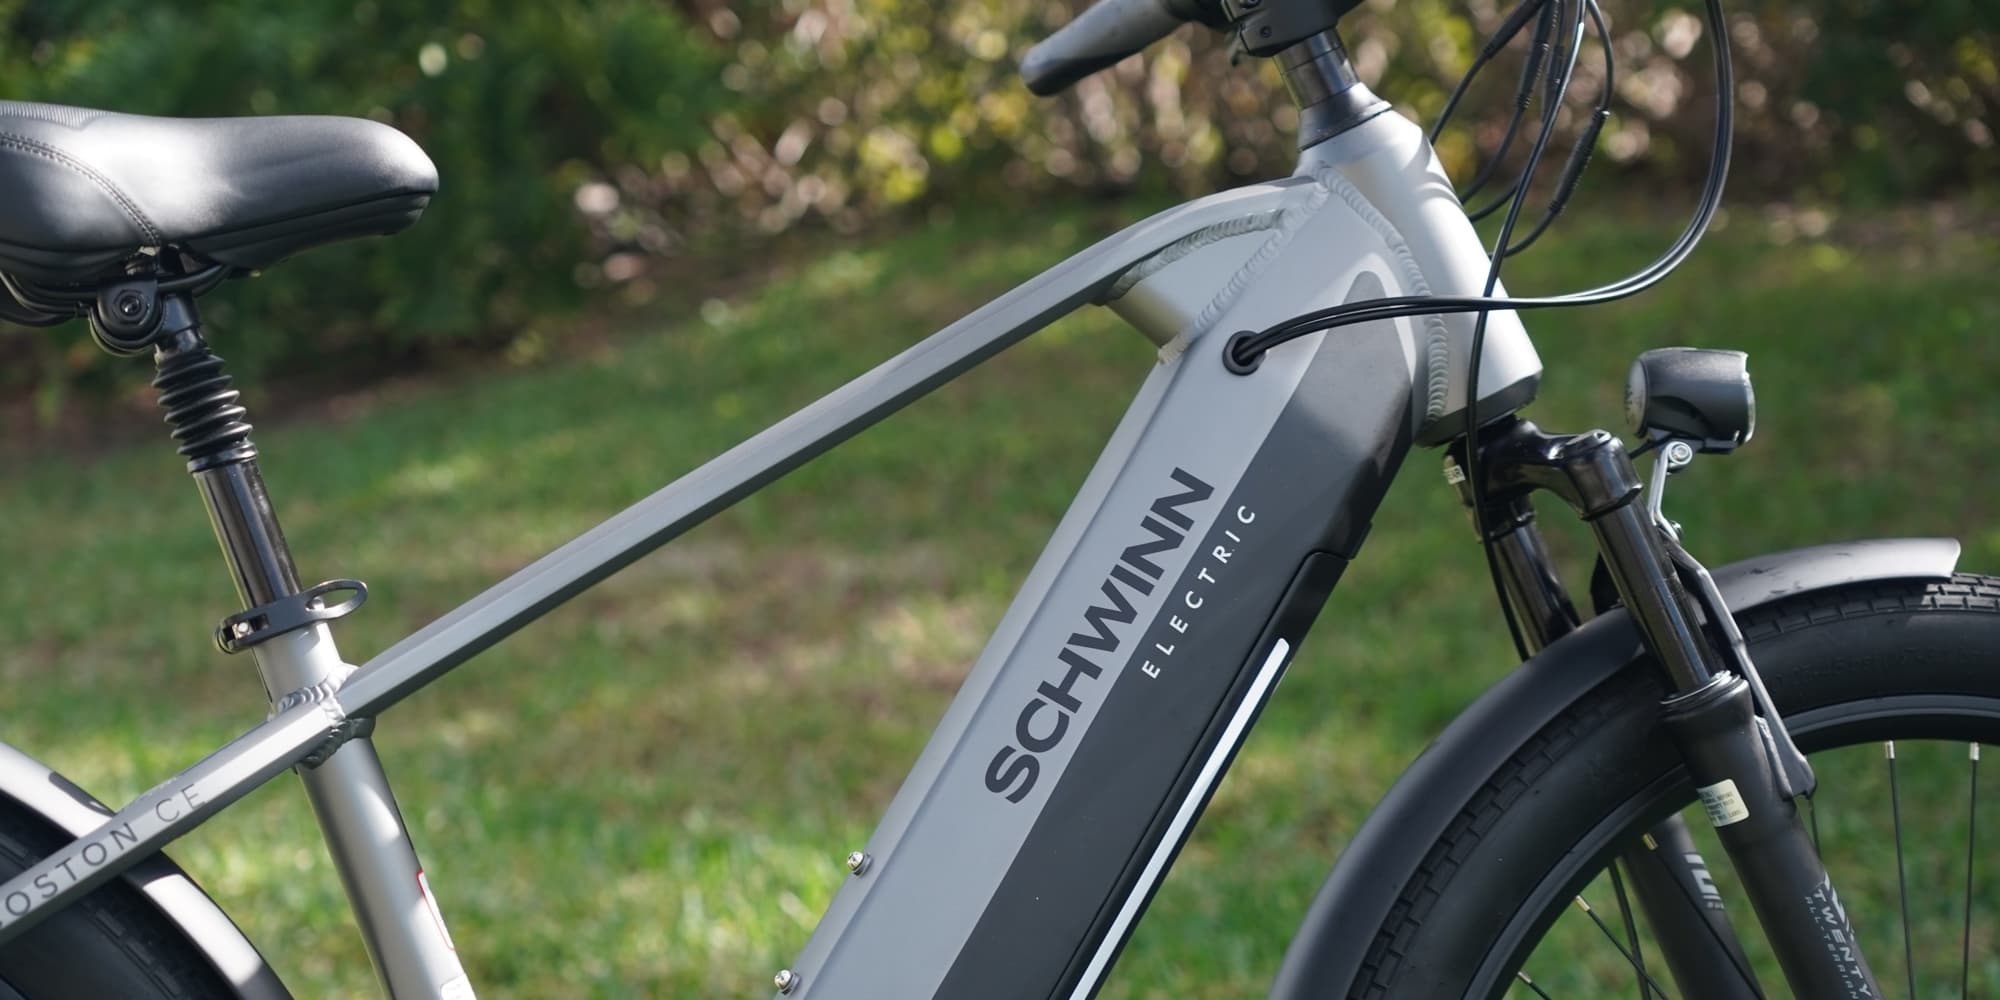 Schwinn Coston CE bike review: I love these awesome side lights!